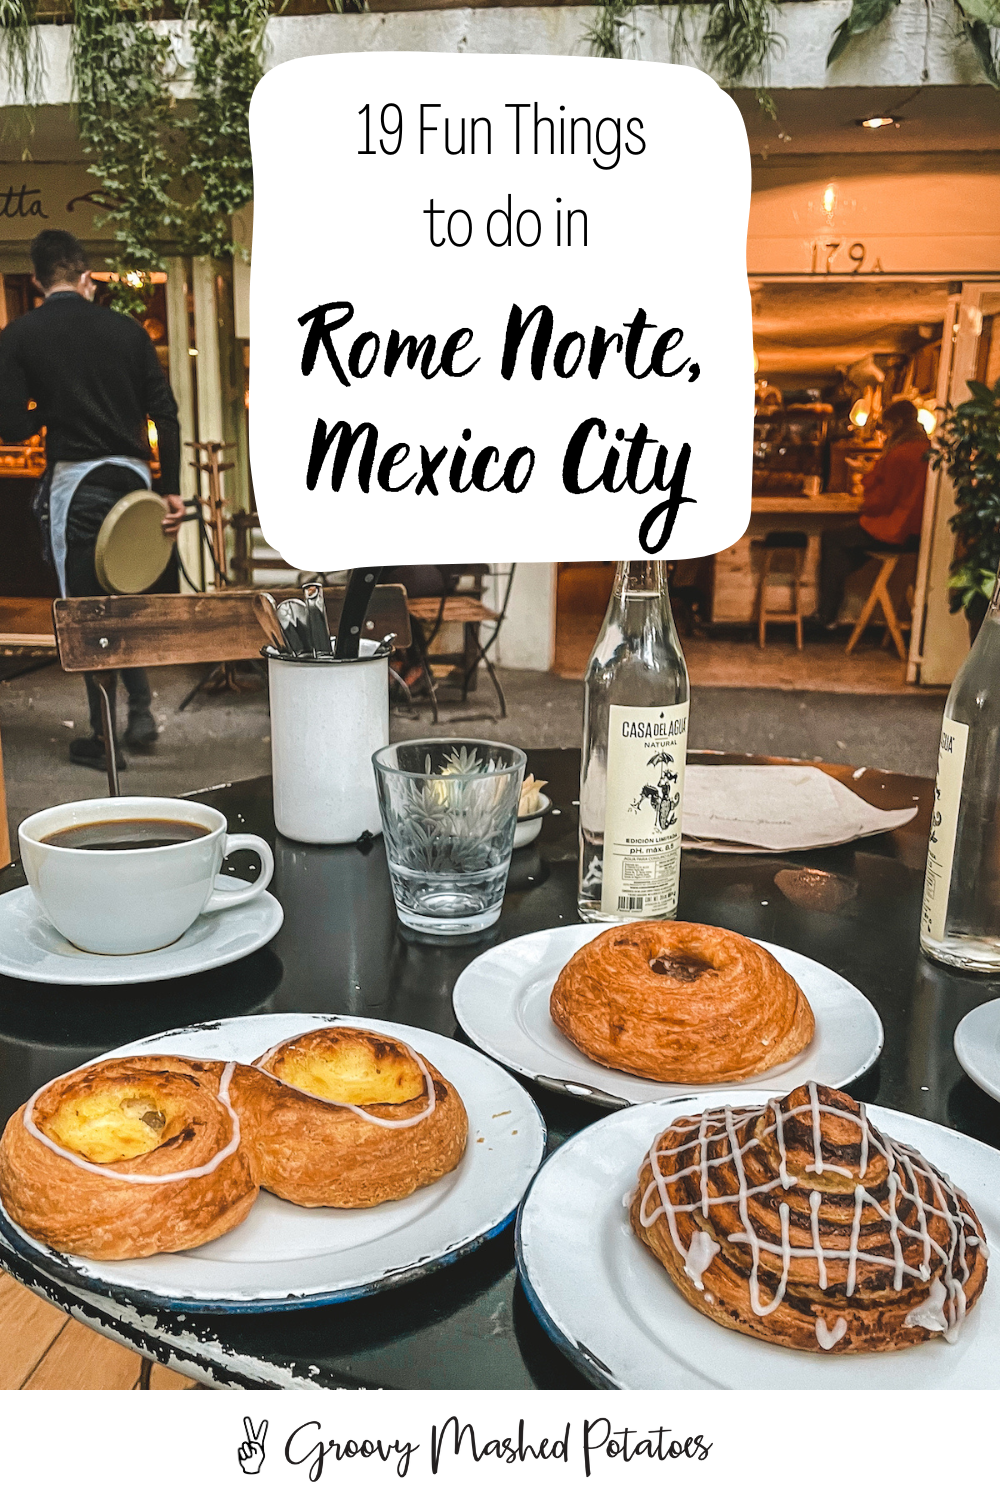 19 Fun Things to Do in Roma Norte, Mexico City